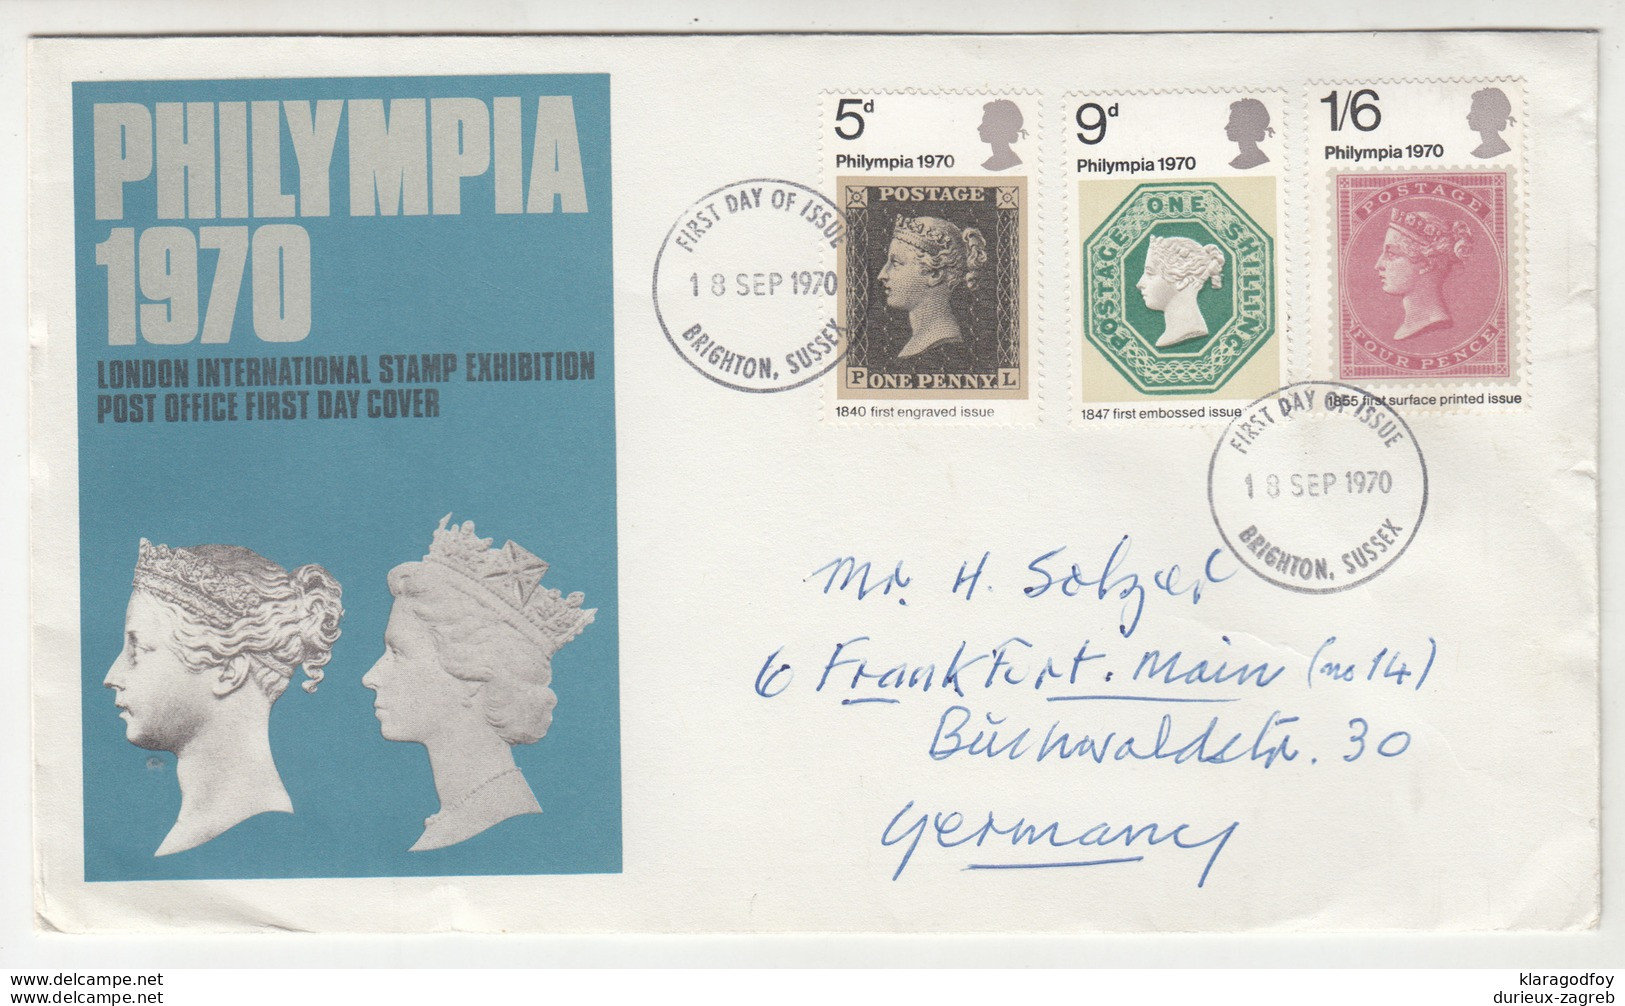 Great Britain 1970 Philympia 1970 FDC B200501 - 1952-1971 Pre-Decimal Issues